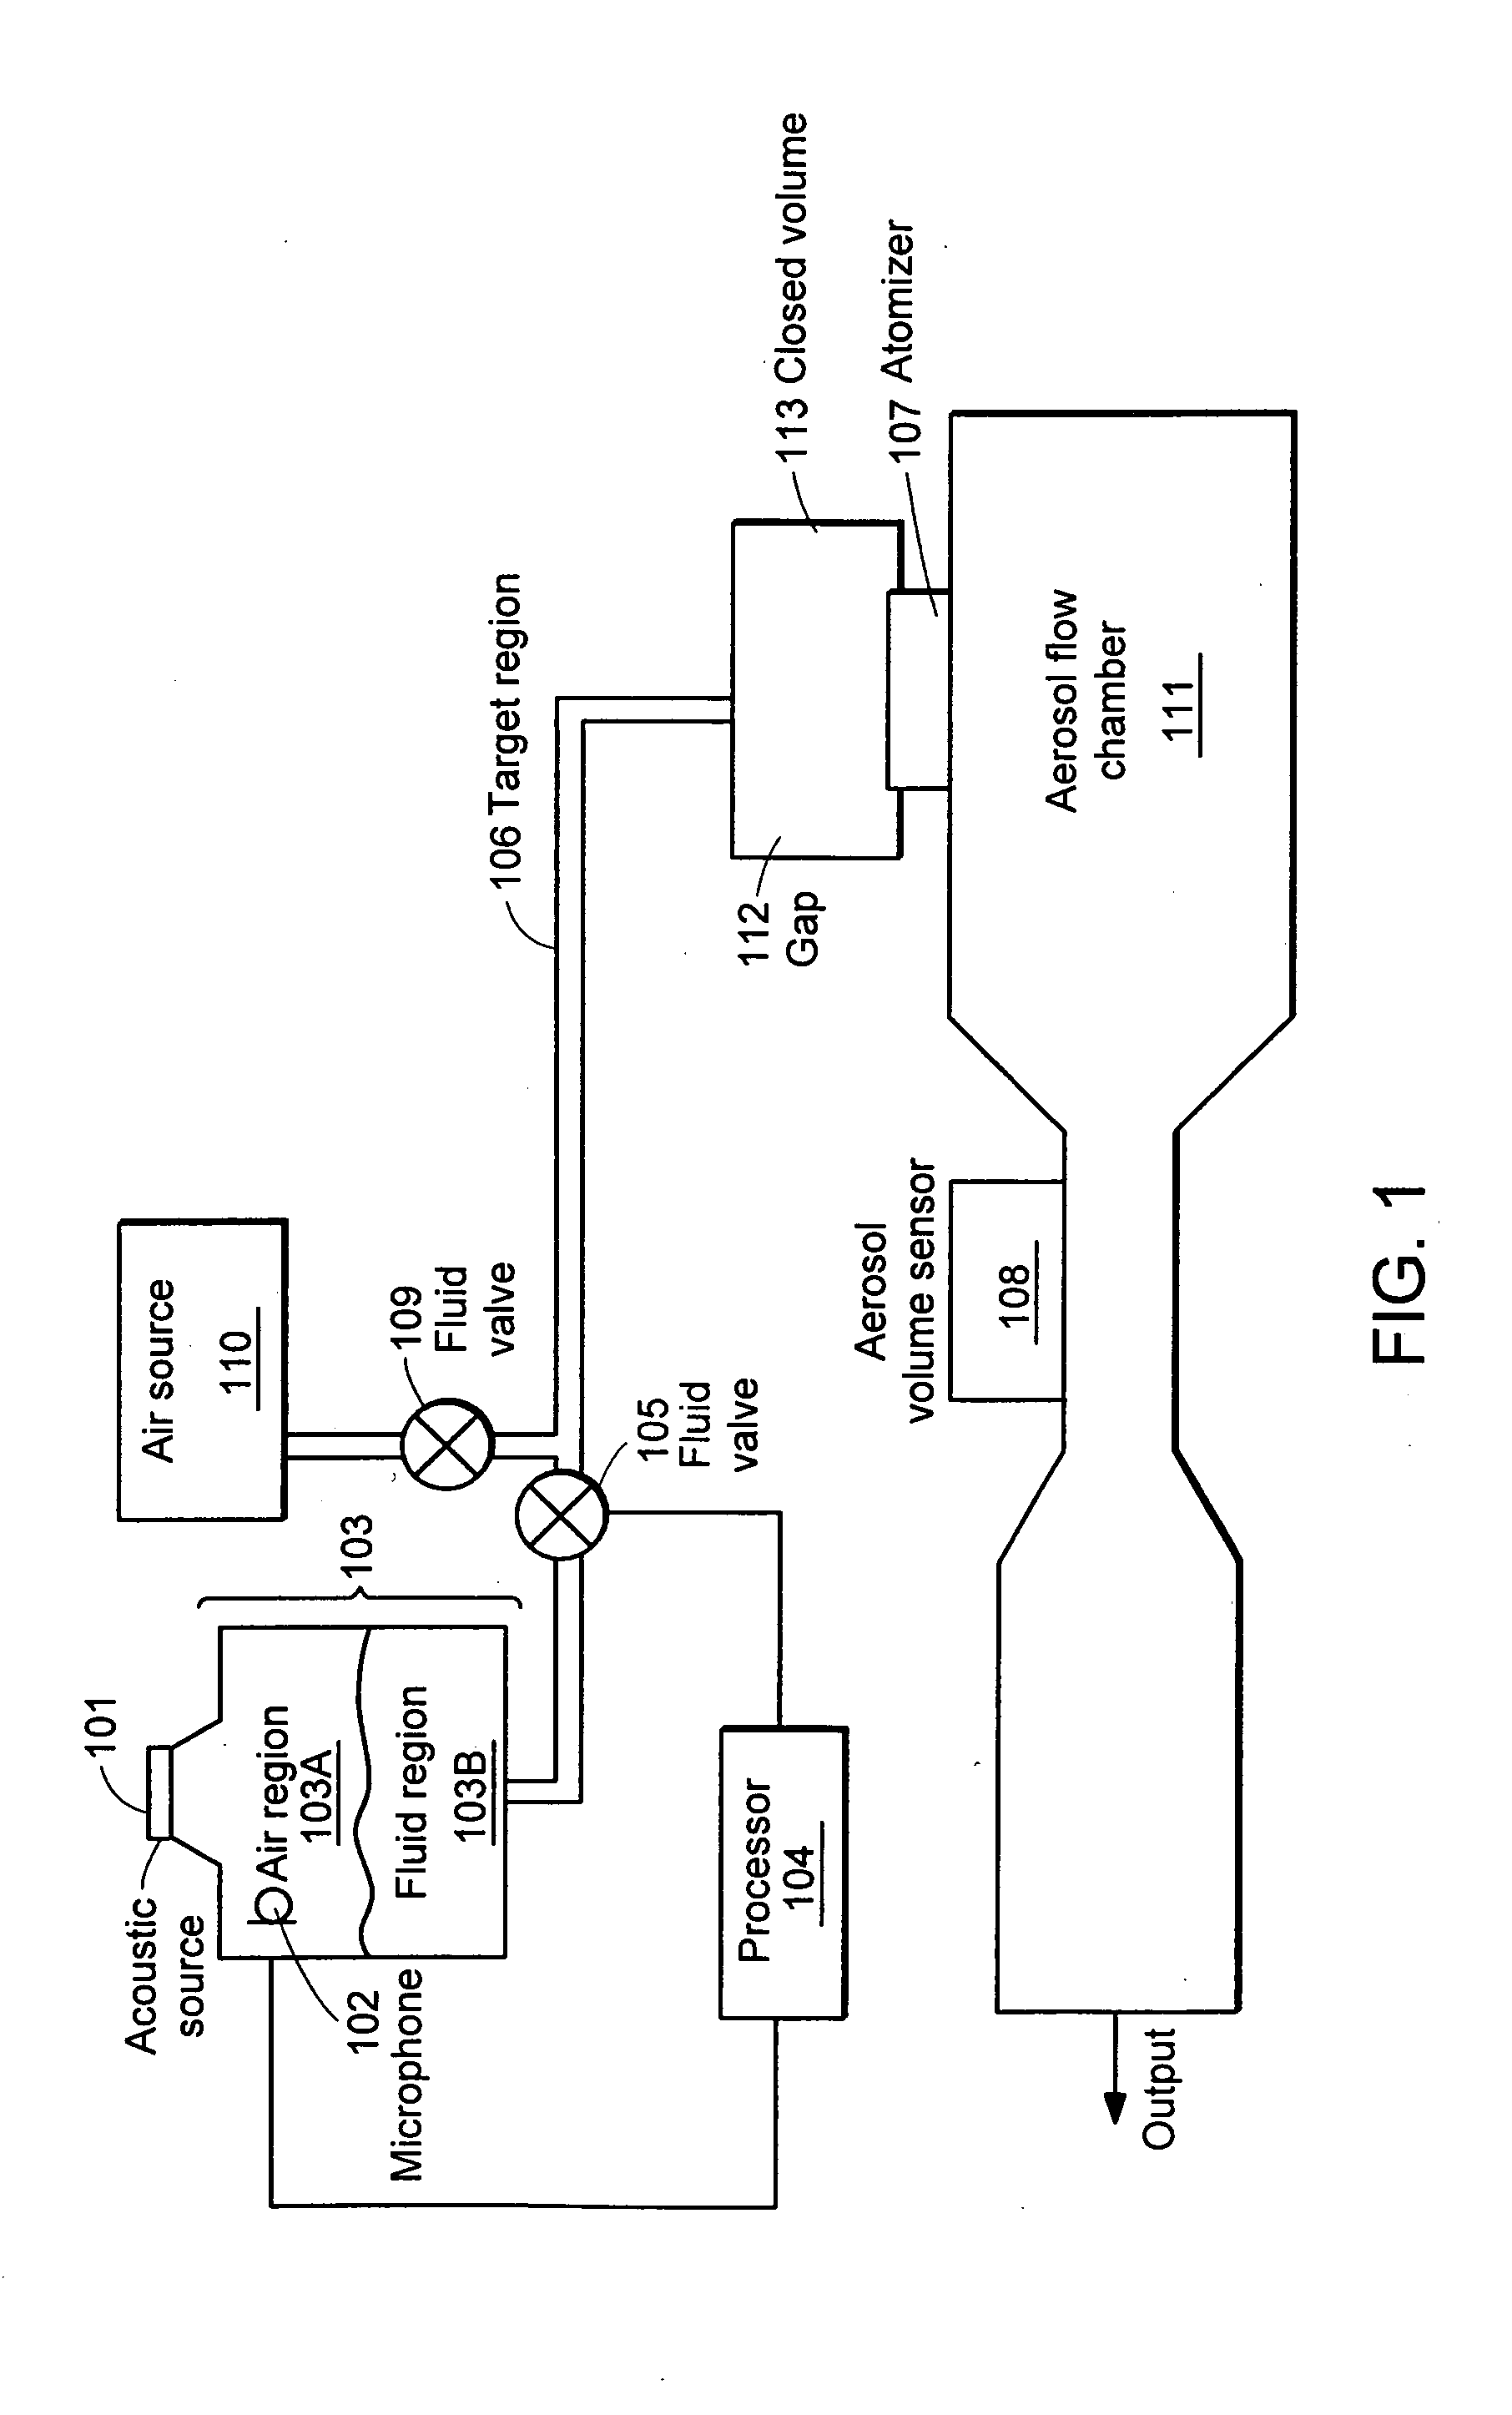 System and method for improved volume measurement